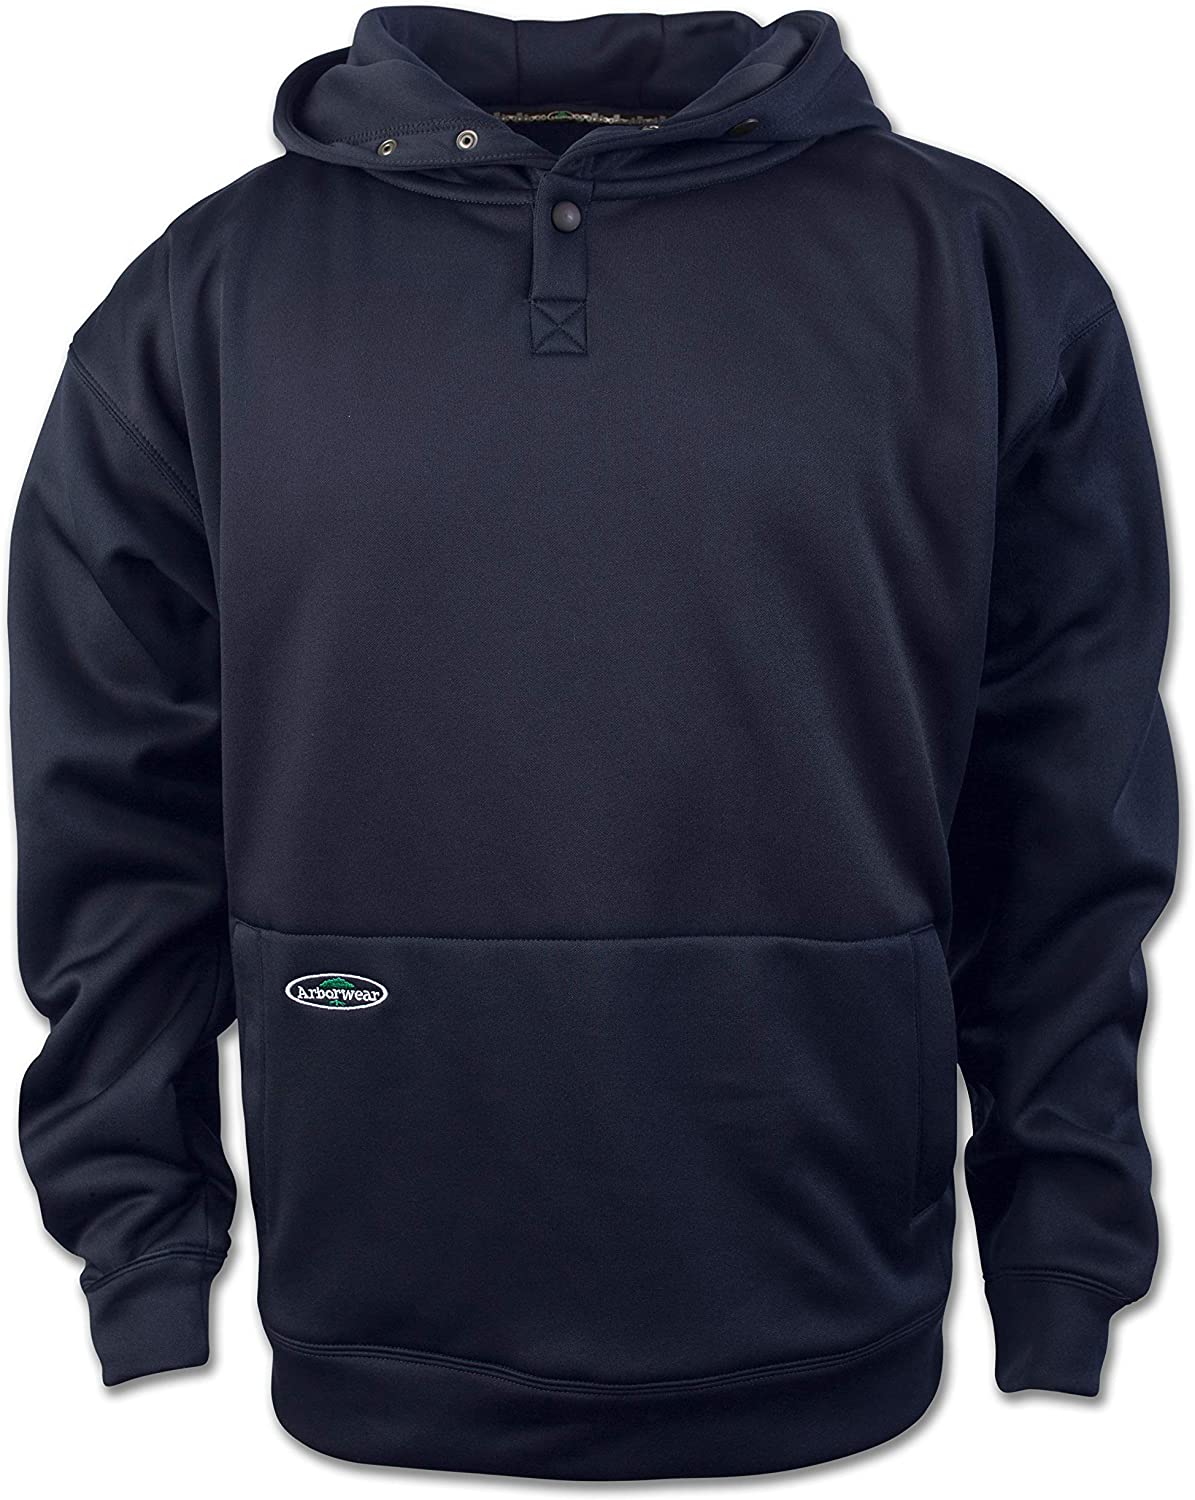 Men's Arborwear Tech Double Thick Pullover in Navy